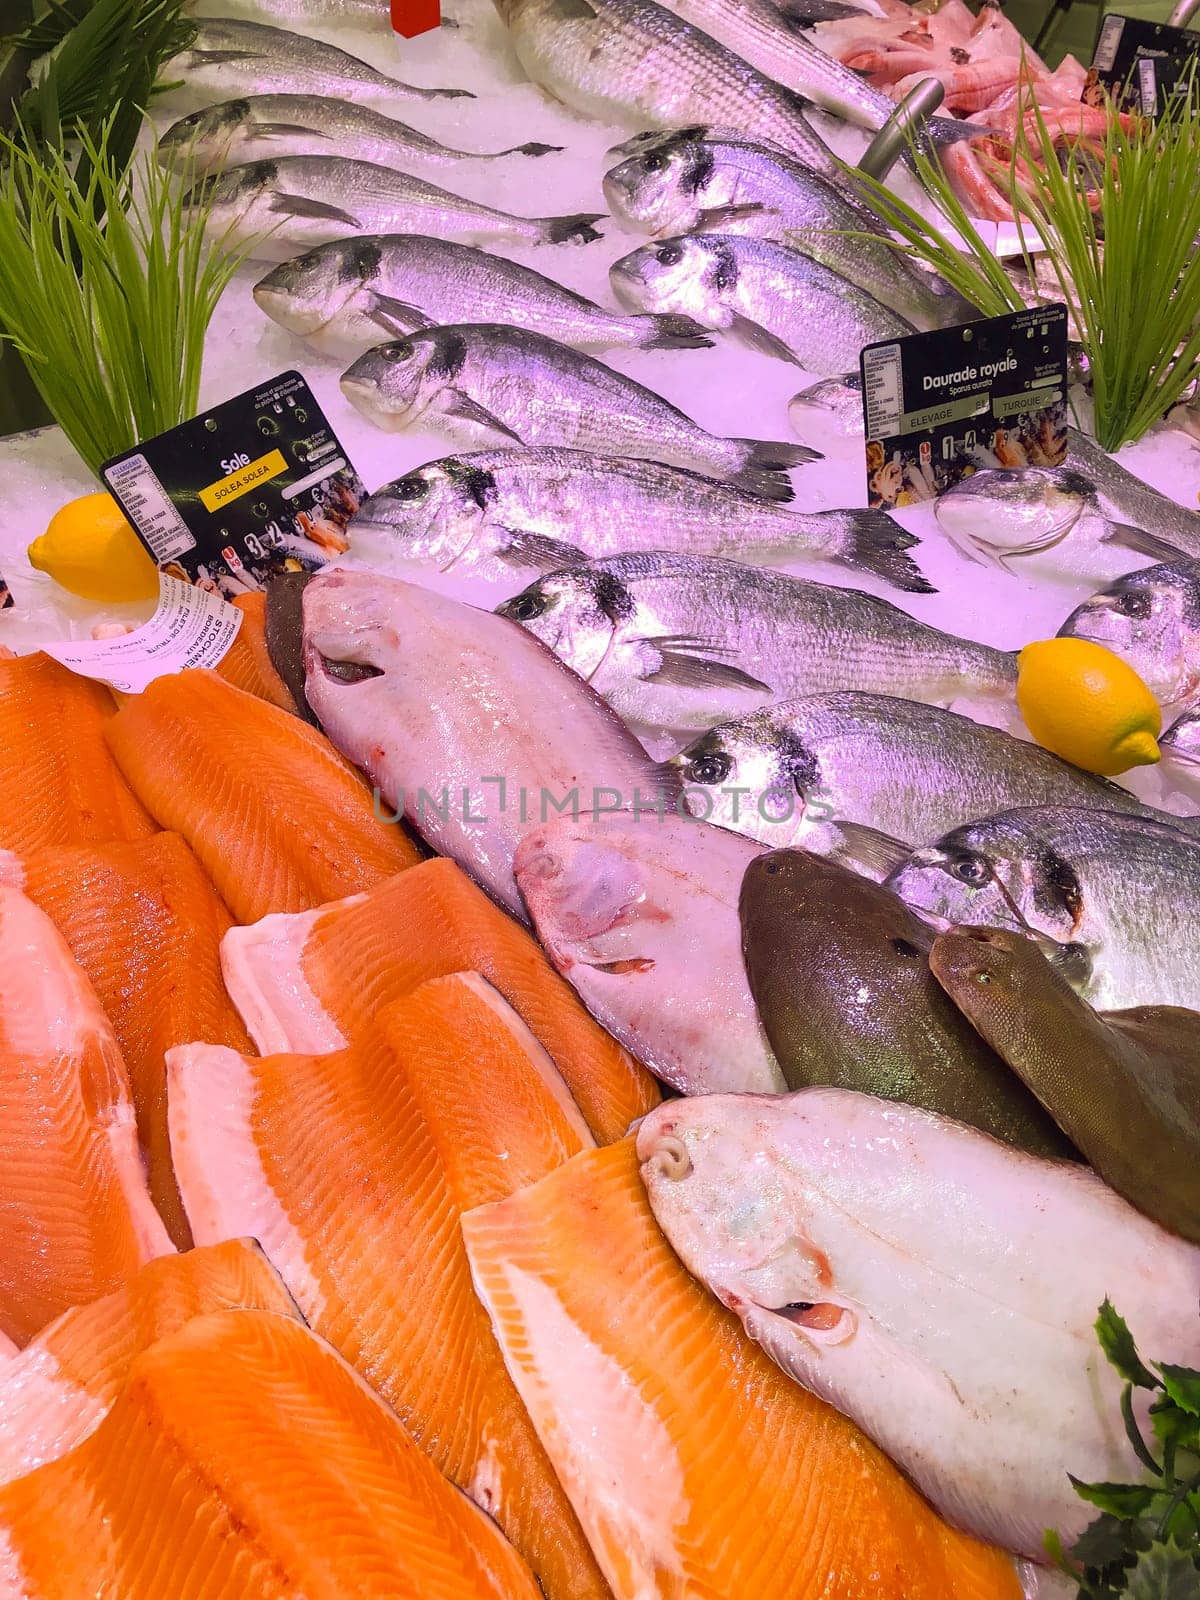 FRANCE, BORDEAUX, February, 9, 2024: Assortment of fresh daily fish on ice market in supermarket by FreeProd